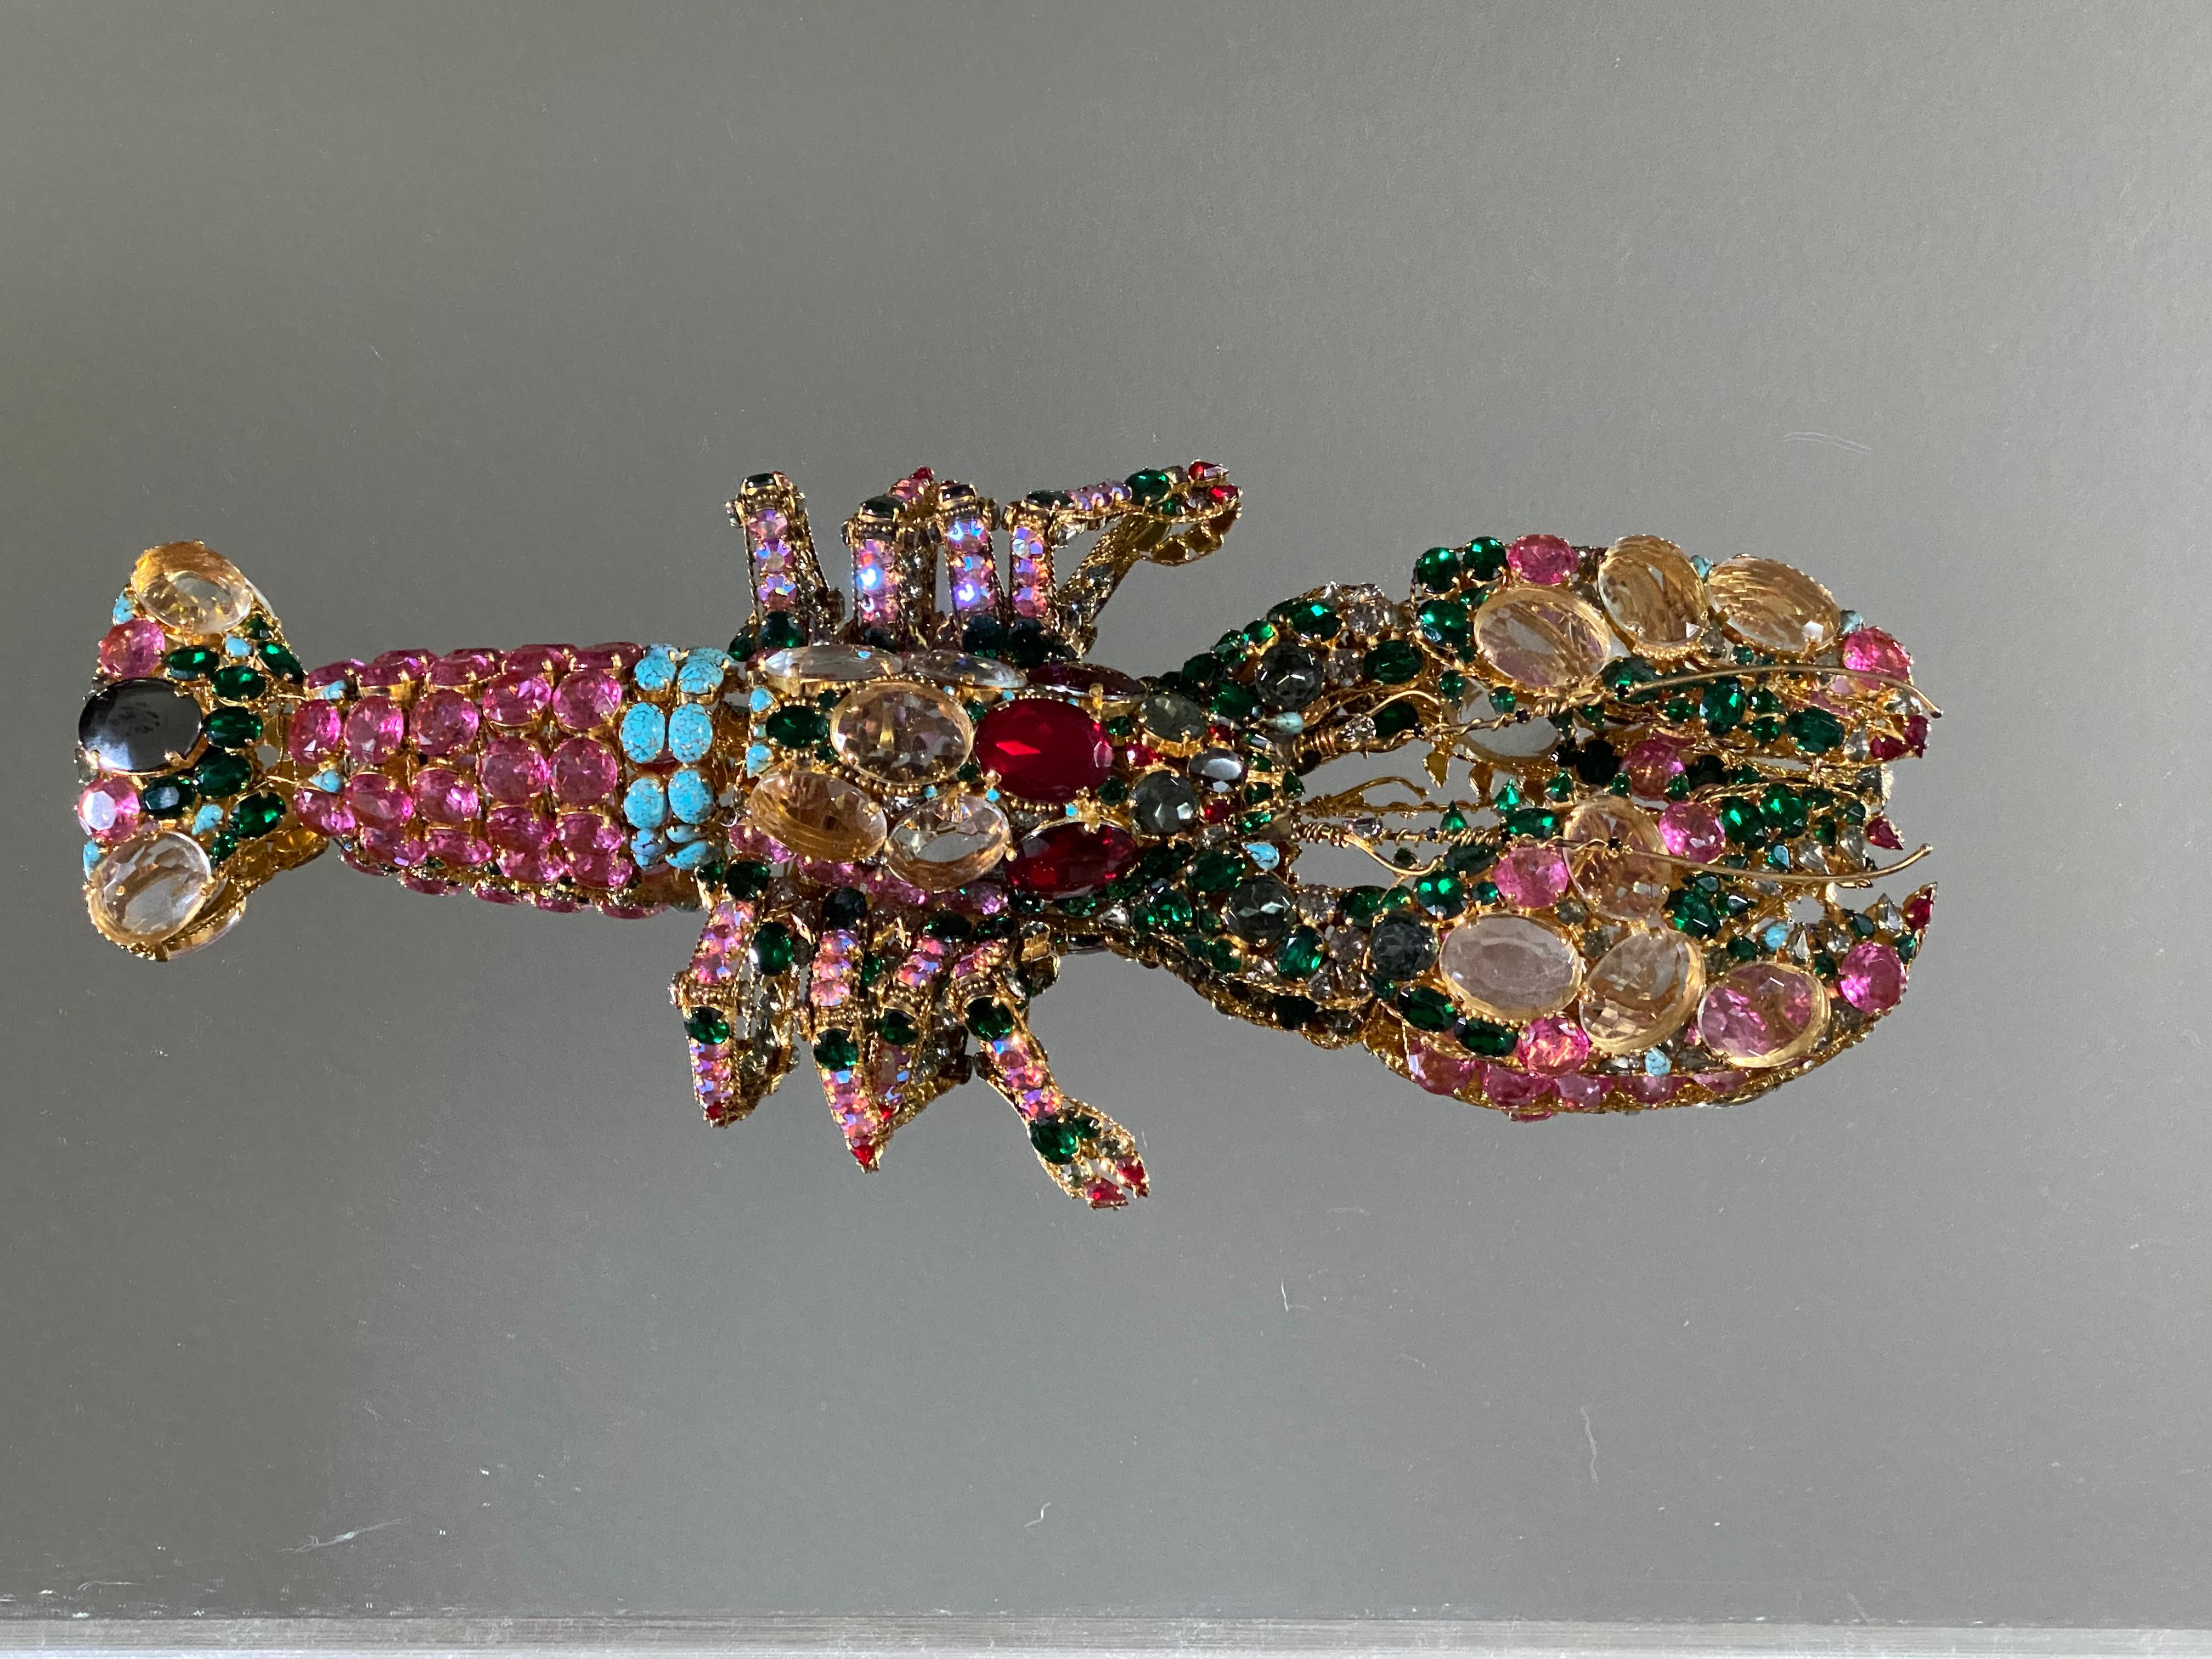 Never seen a huge brooch like this, so unique and stunning in person
I was told that this brooch was custom made for designer on the runway but we don't have any names or photographs to match the story.
Unsigned .
Colors and workmanship in person is